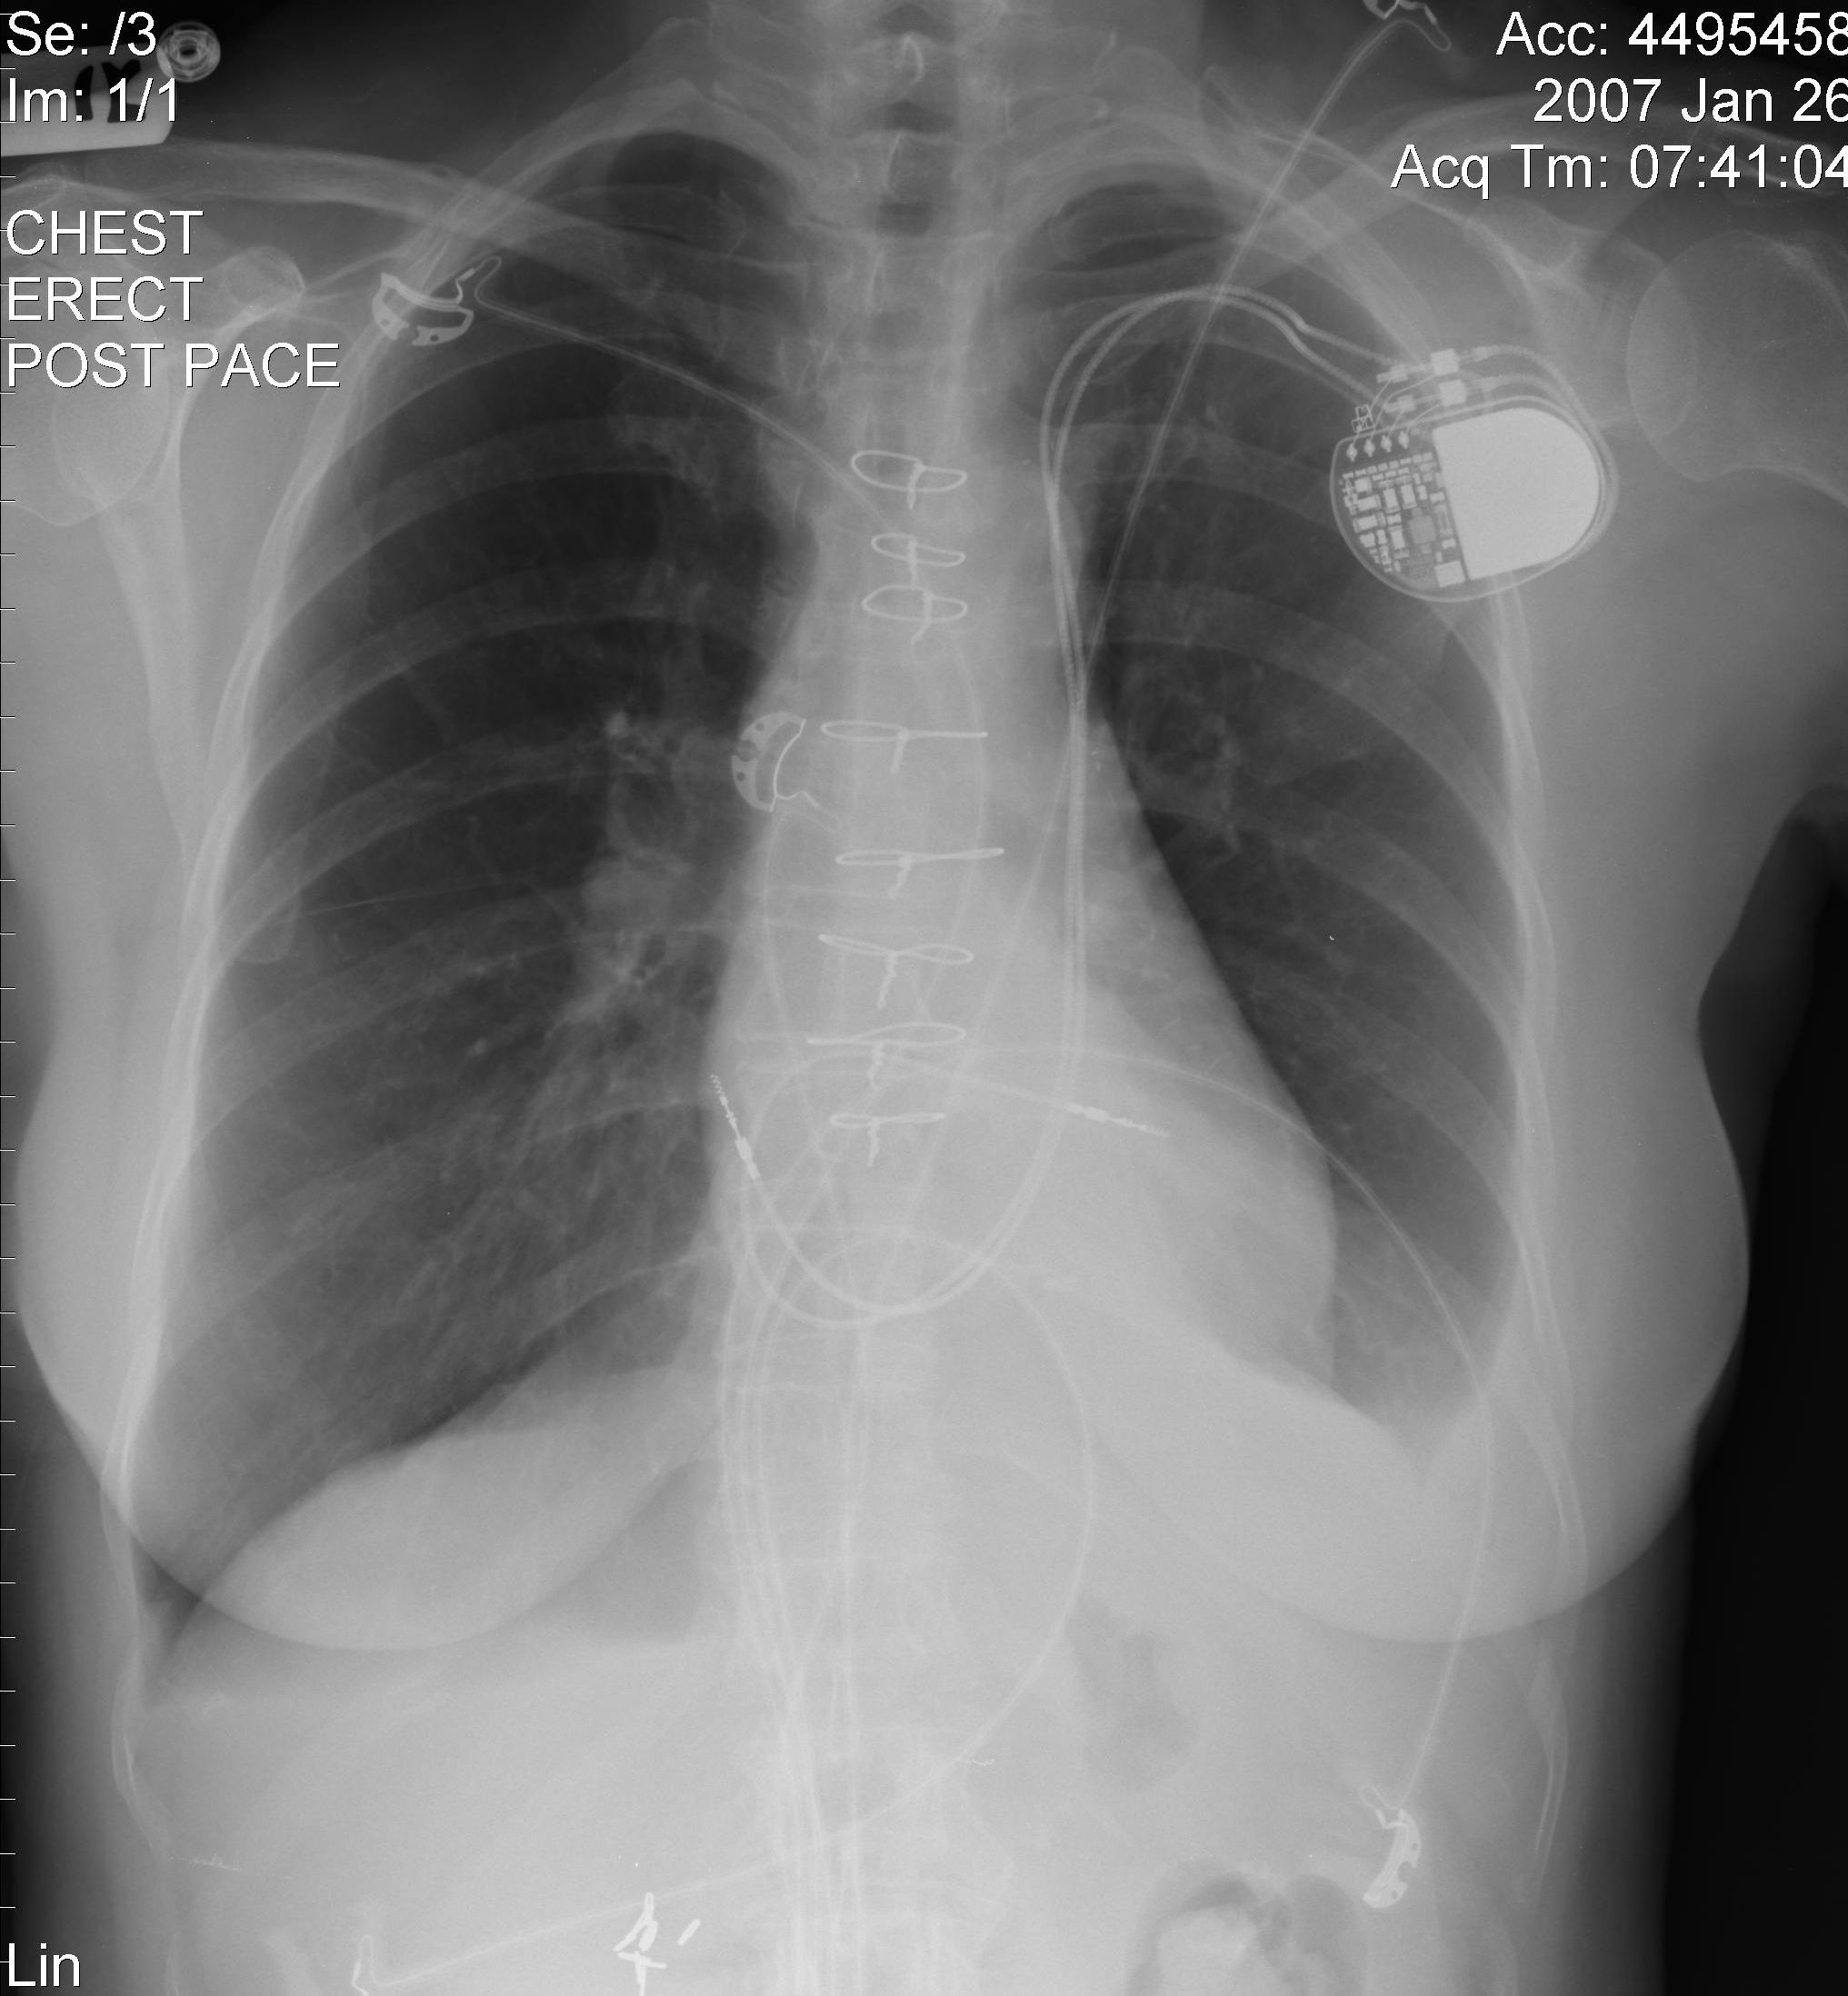 The atrial and ventricular pacemaker leads passing through a persistent left SVC.